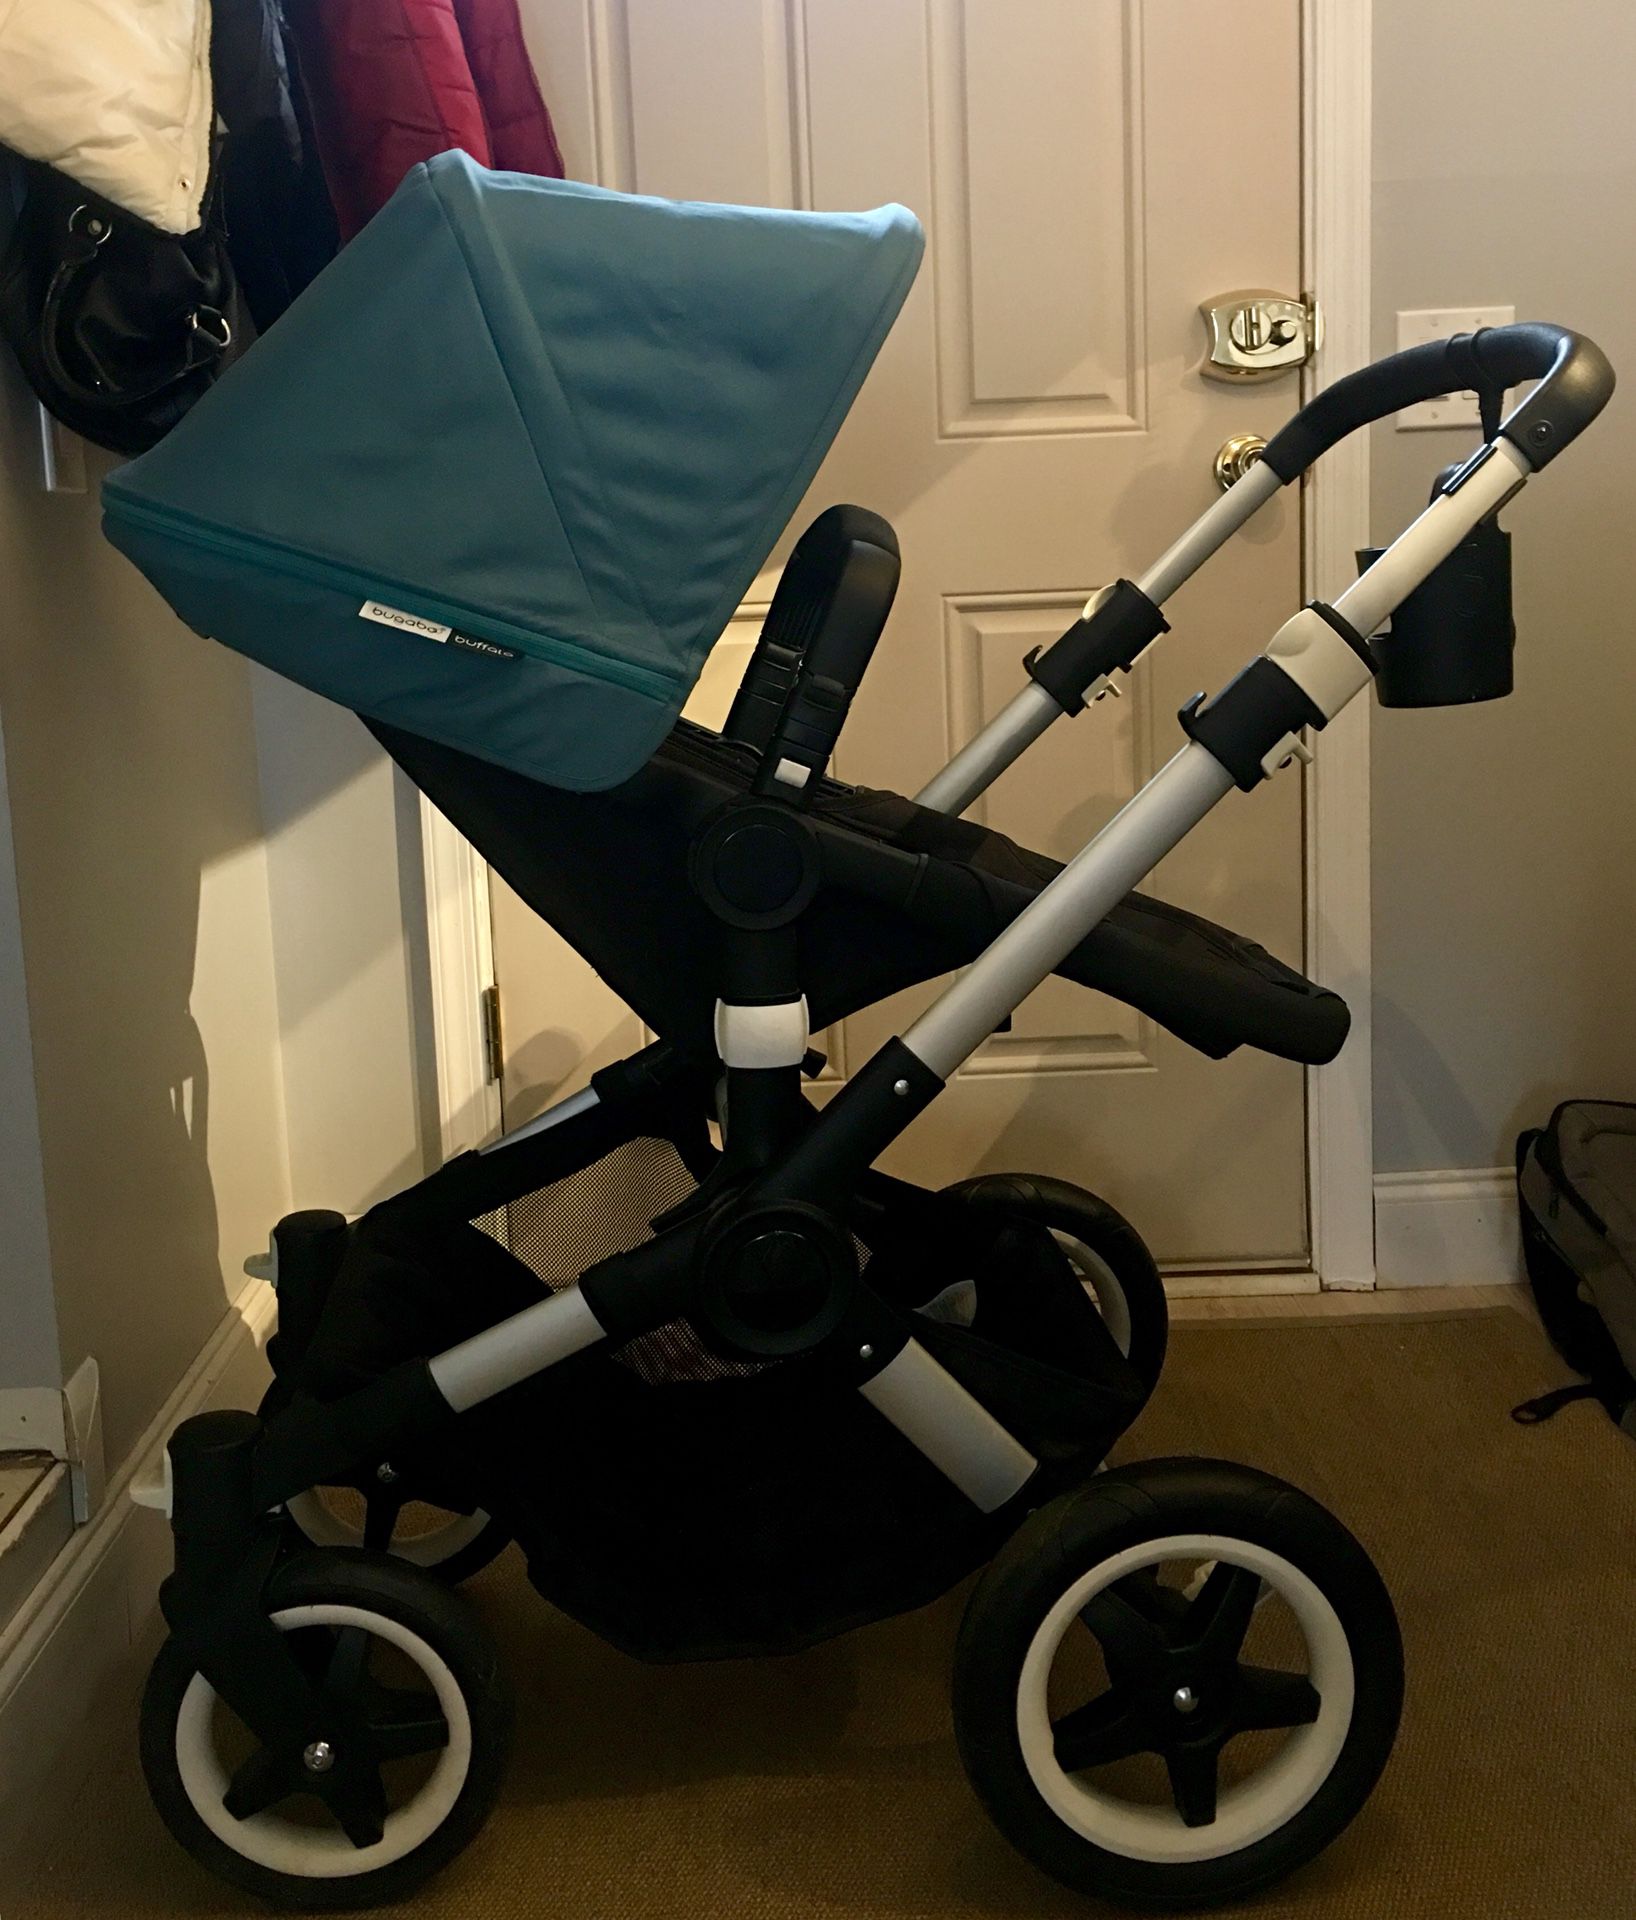 Bugaboo Buffalo Stroller with bassinet for baby - like new